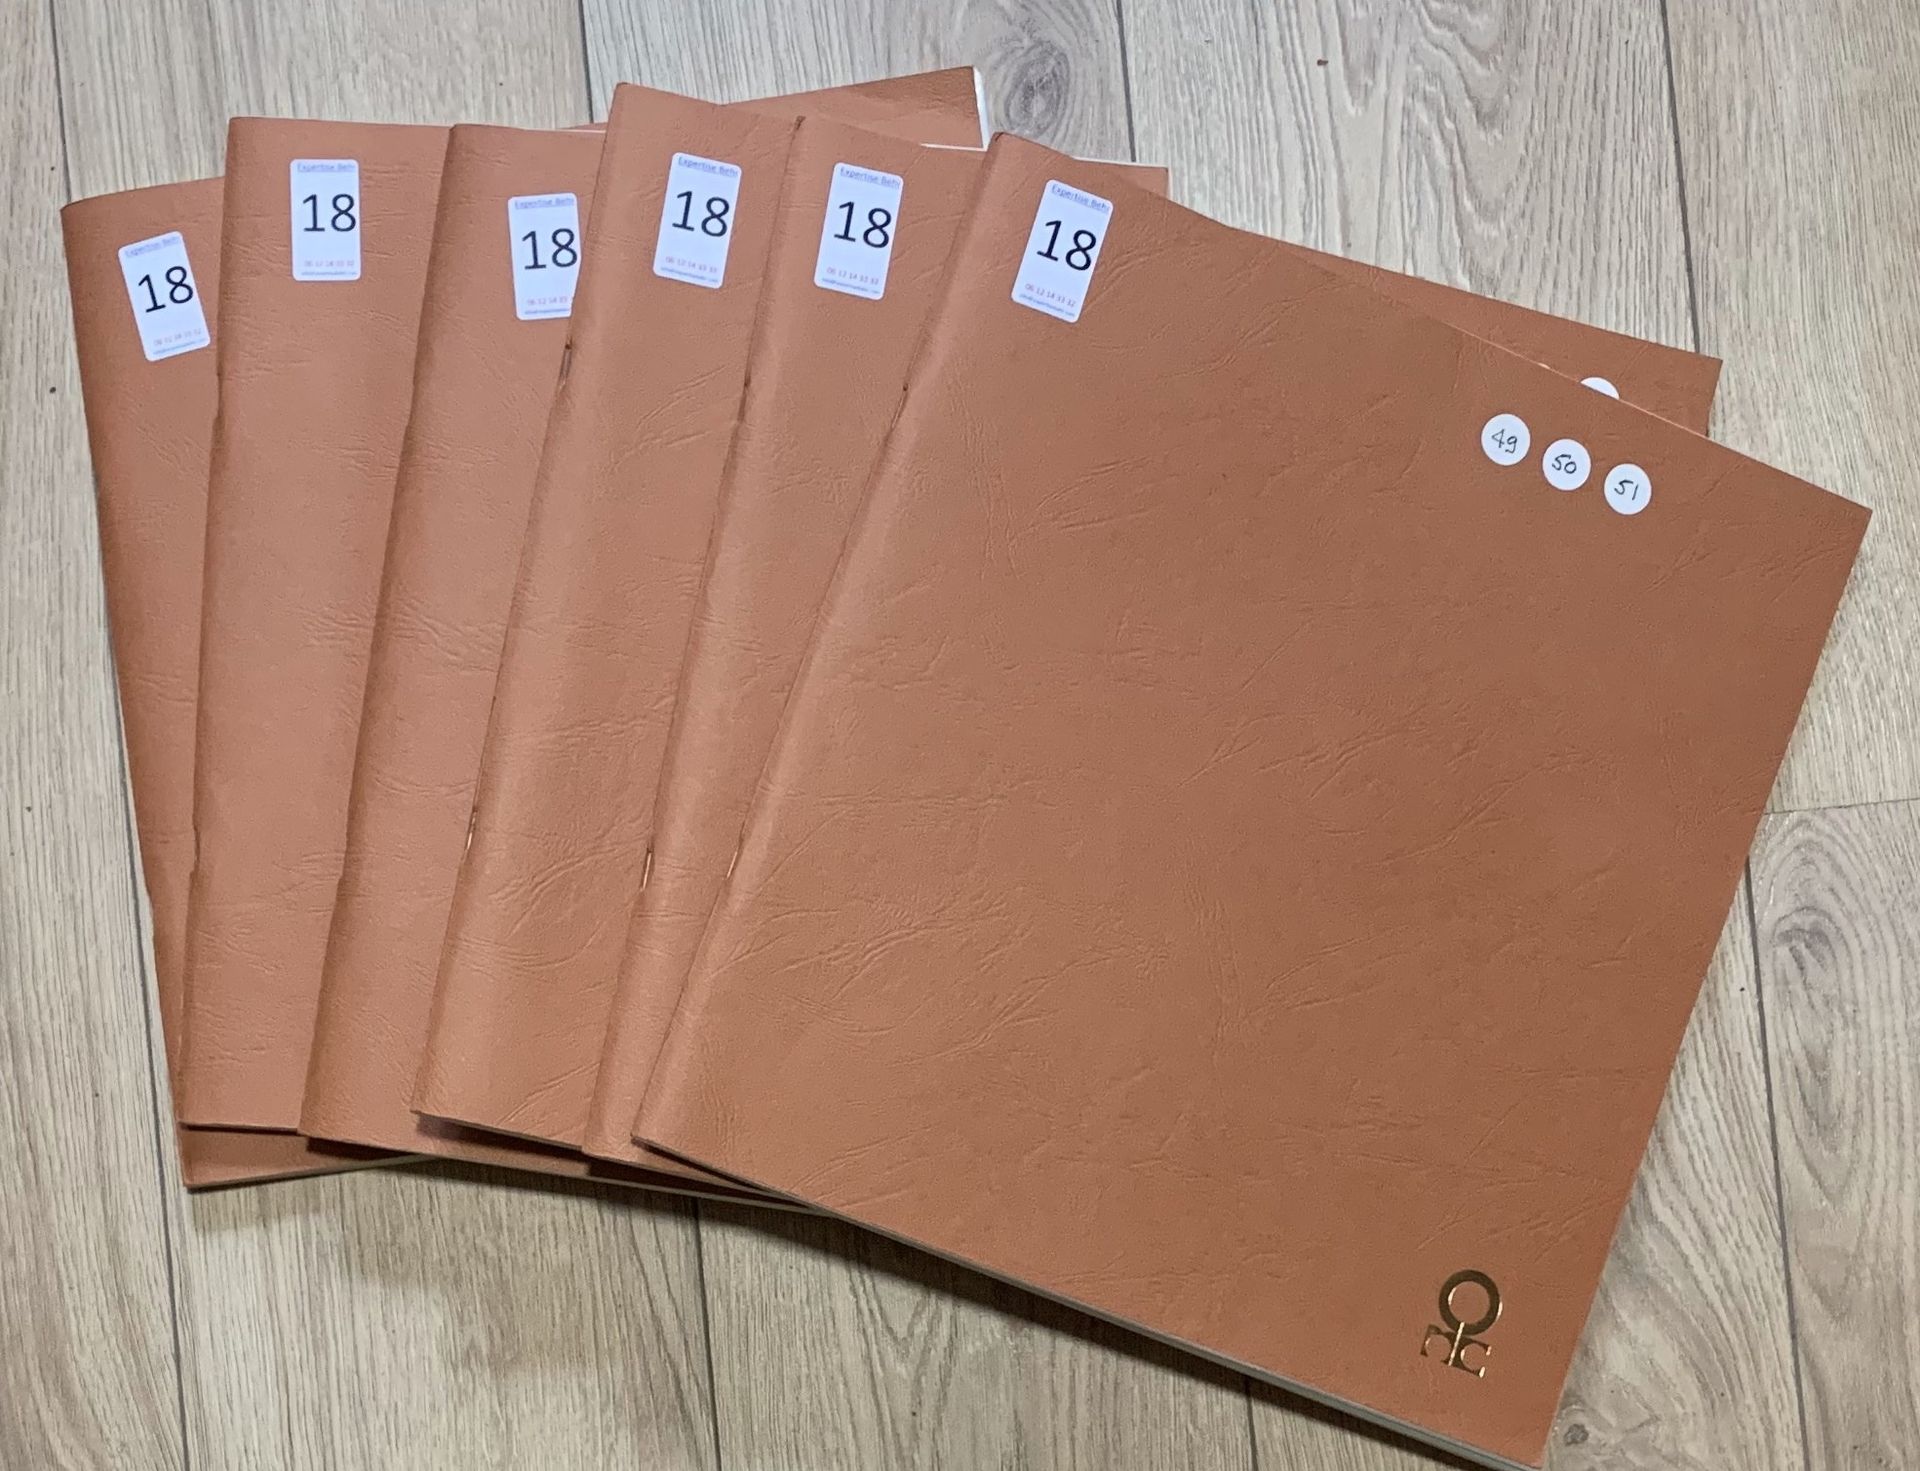 Null 6 France SM binders in complete or almost complete sheets, including Revolu&hellip;